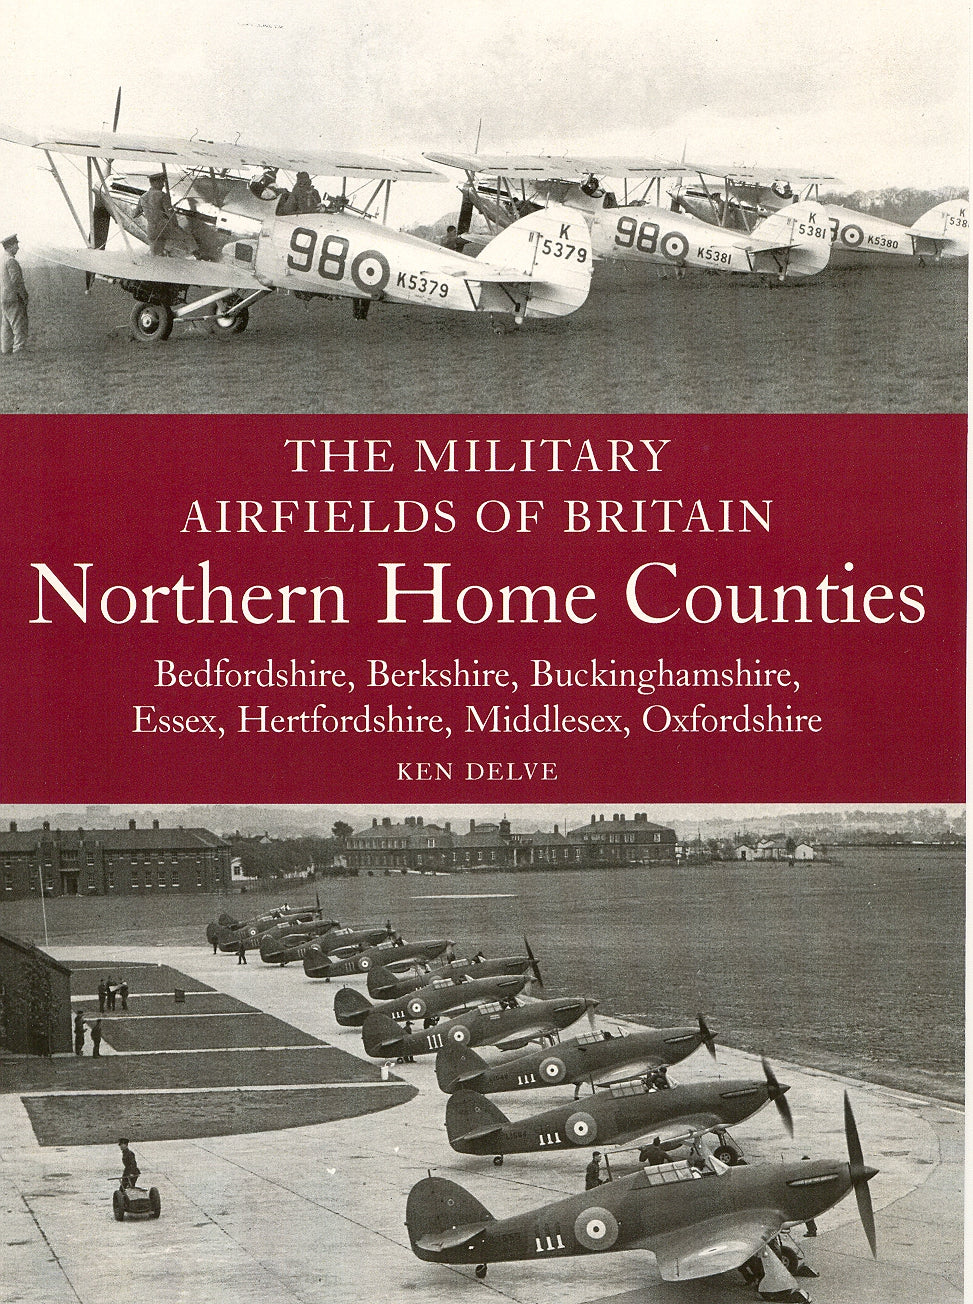 The Military Airfields of Britain: Northern Home Counties (Bedfordshire&amp;#44; Berkshire&amp;#44; Buckinghamshire&amp;#44; Essex&amp;#44; Hertfordshire&amp;#44; Middlesex&amp;#44; Oxfordshire)